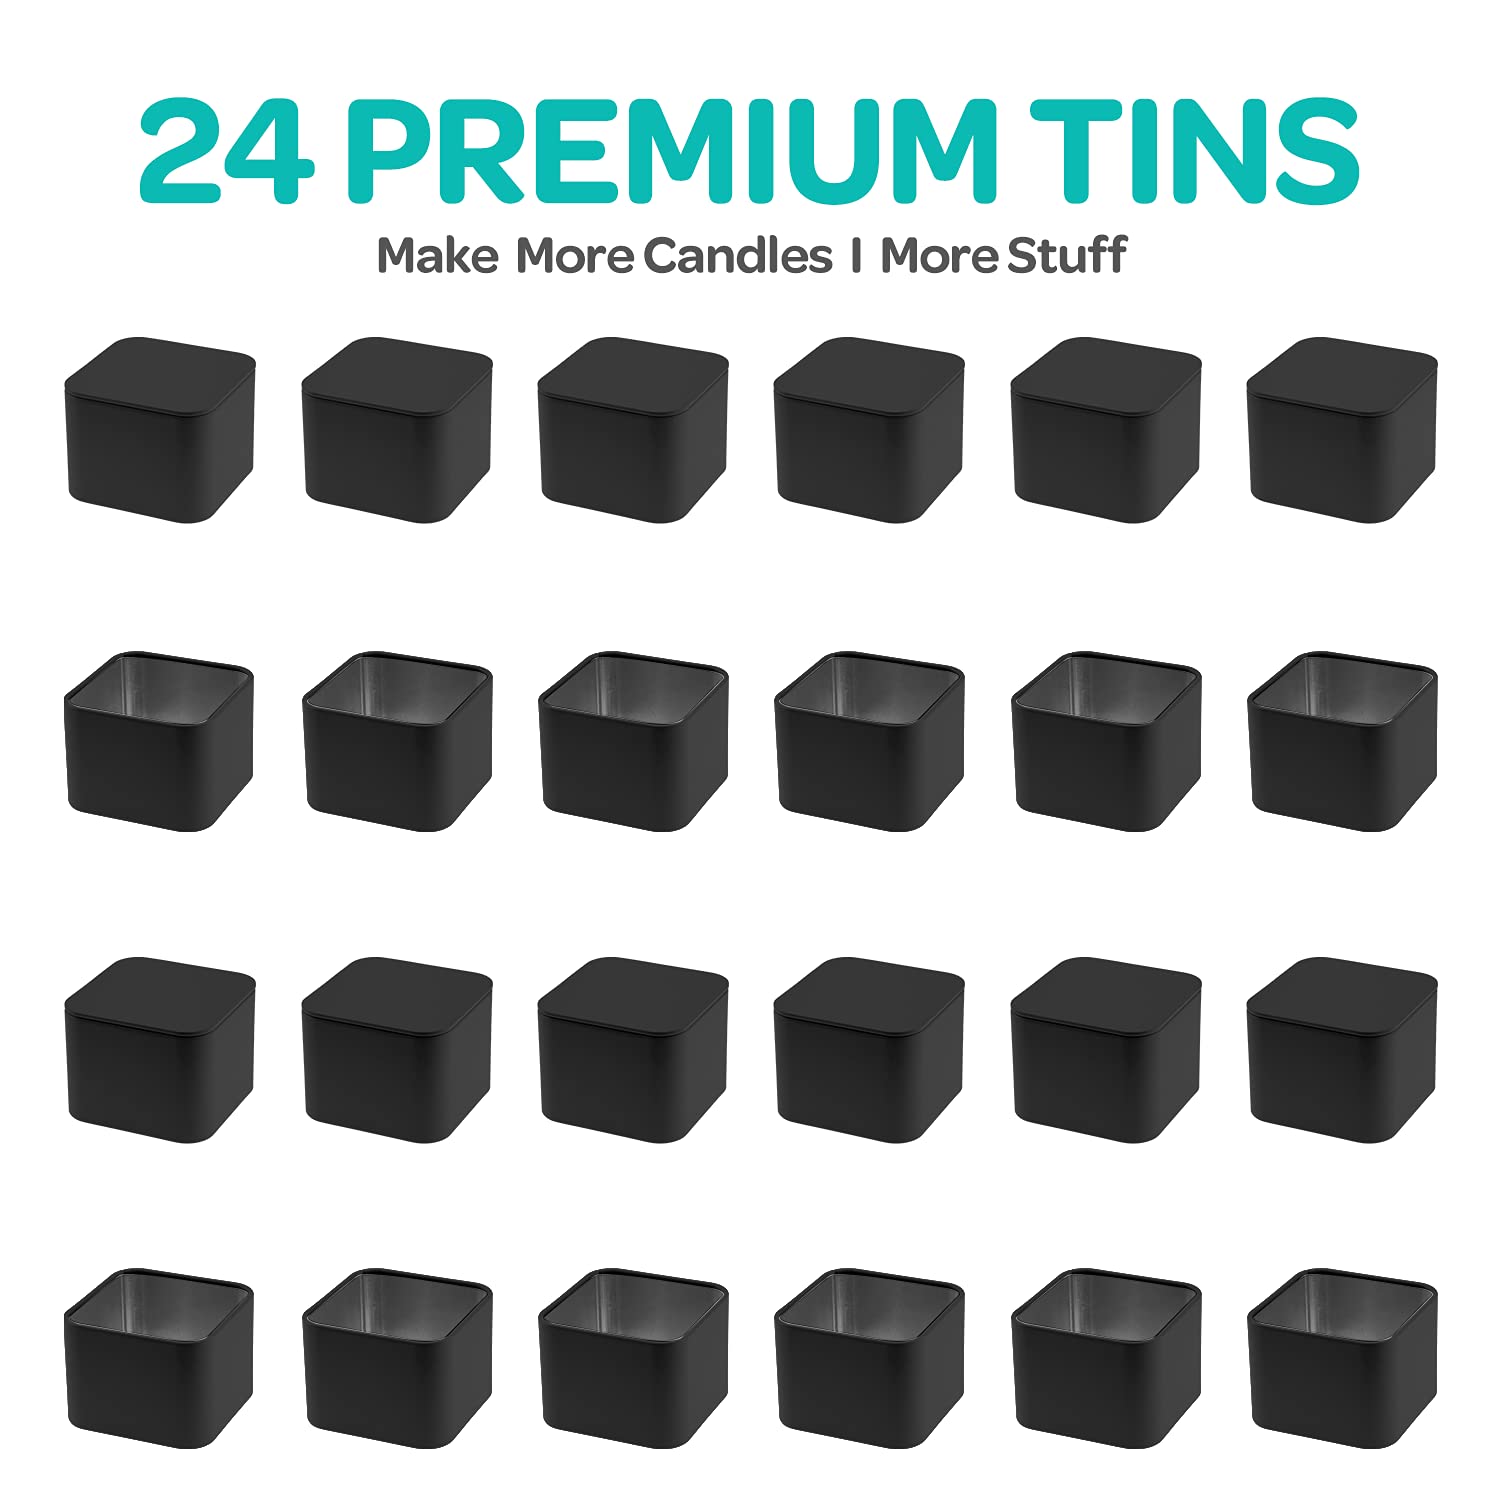 Hearts & Crafts Black Square Candle Tins 8 oz with Lids - 24-Pack of Bulk Candle Jars for Making Candles, Arts & Crafts, Storage, Gifts, and More - Empty Candle Jars with Lids